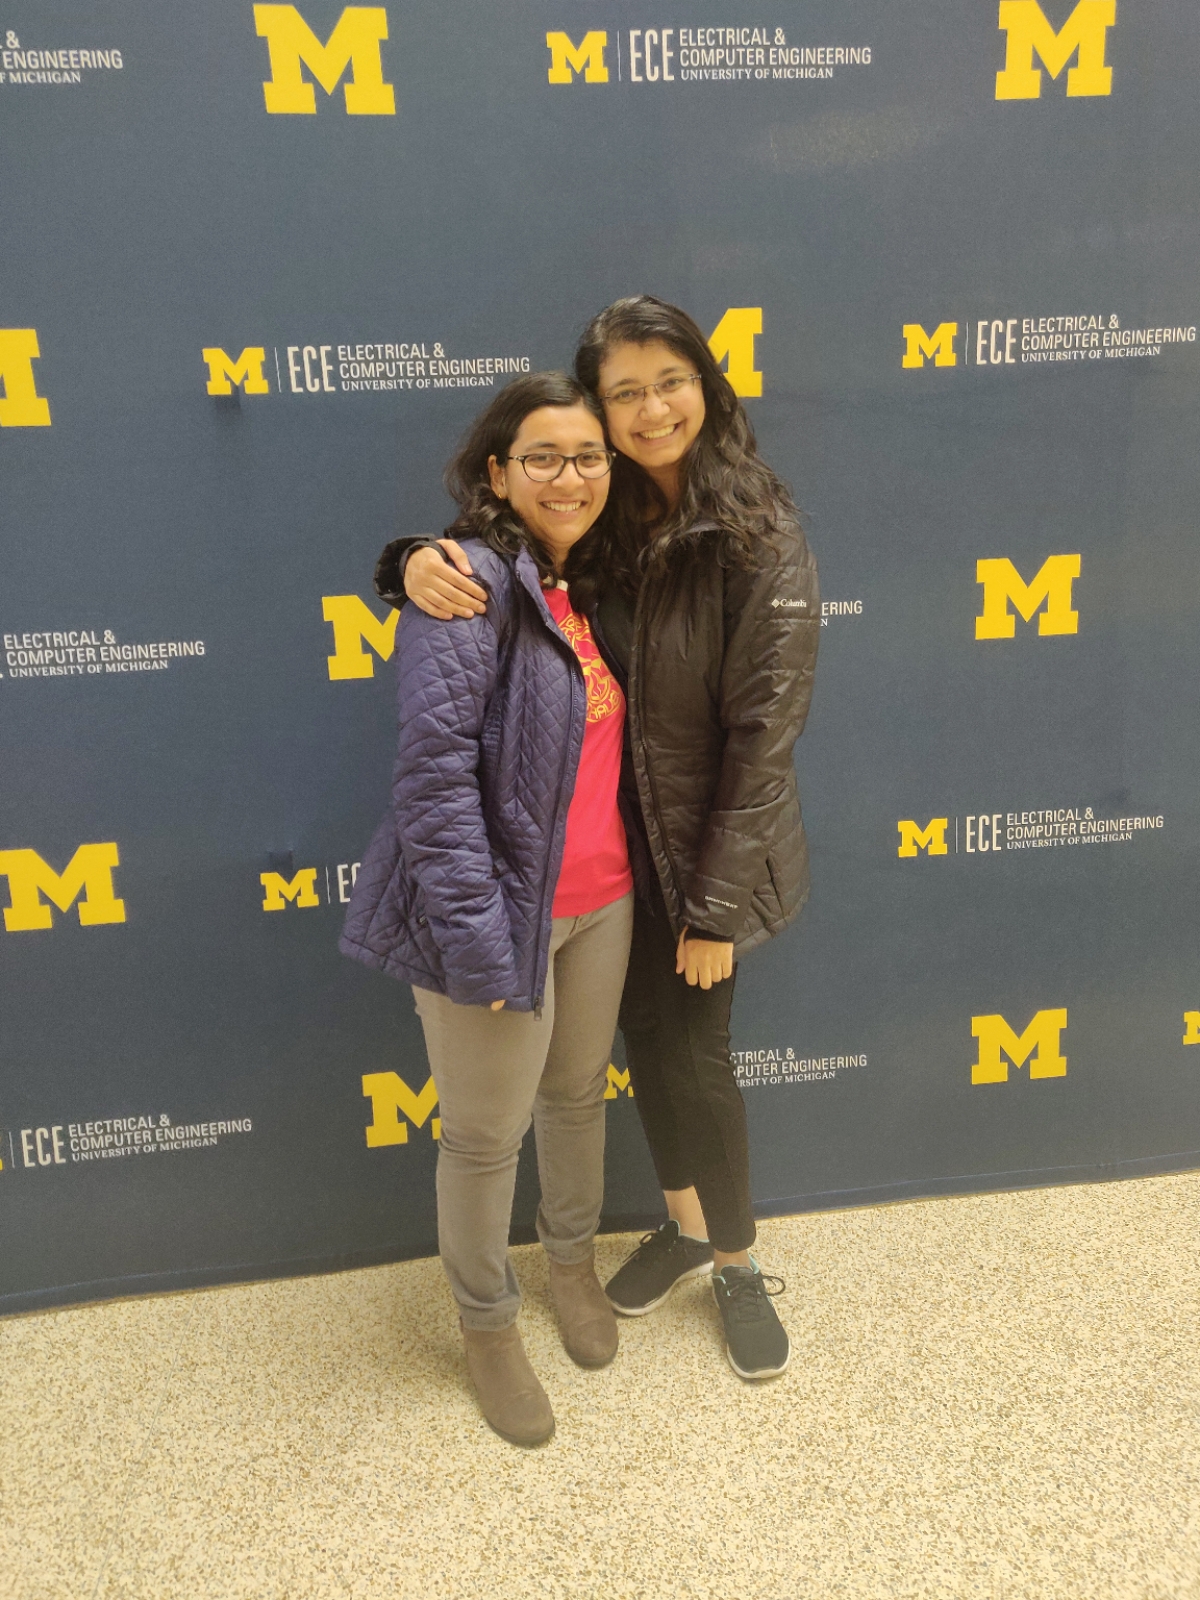 two women stand in front of a backdrop of Michigan ECE logos